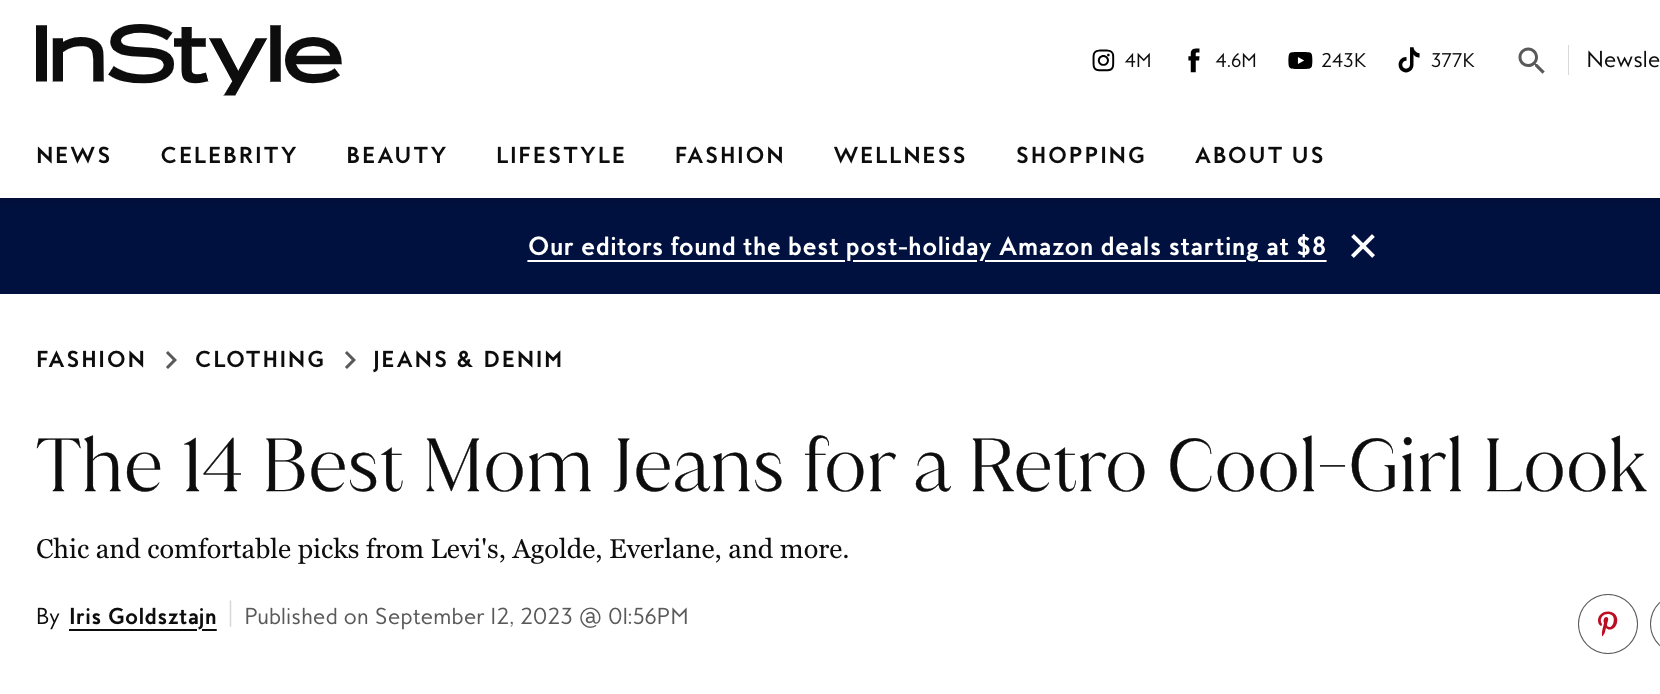 InStyle 14 Best Mom Jeans